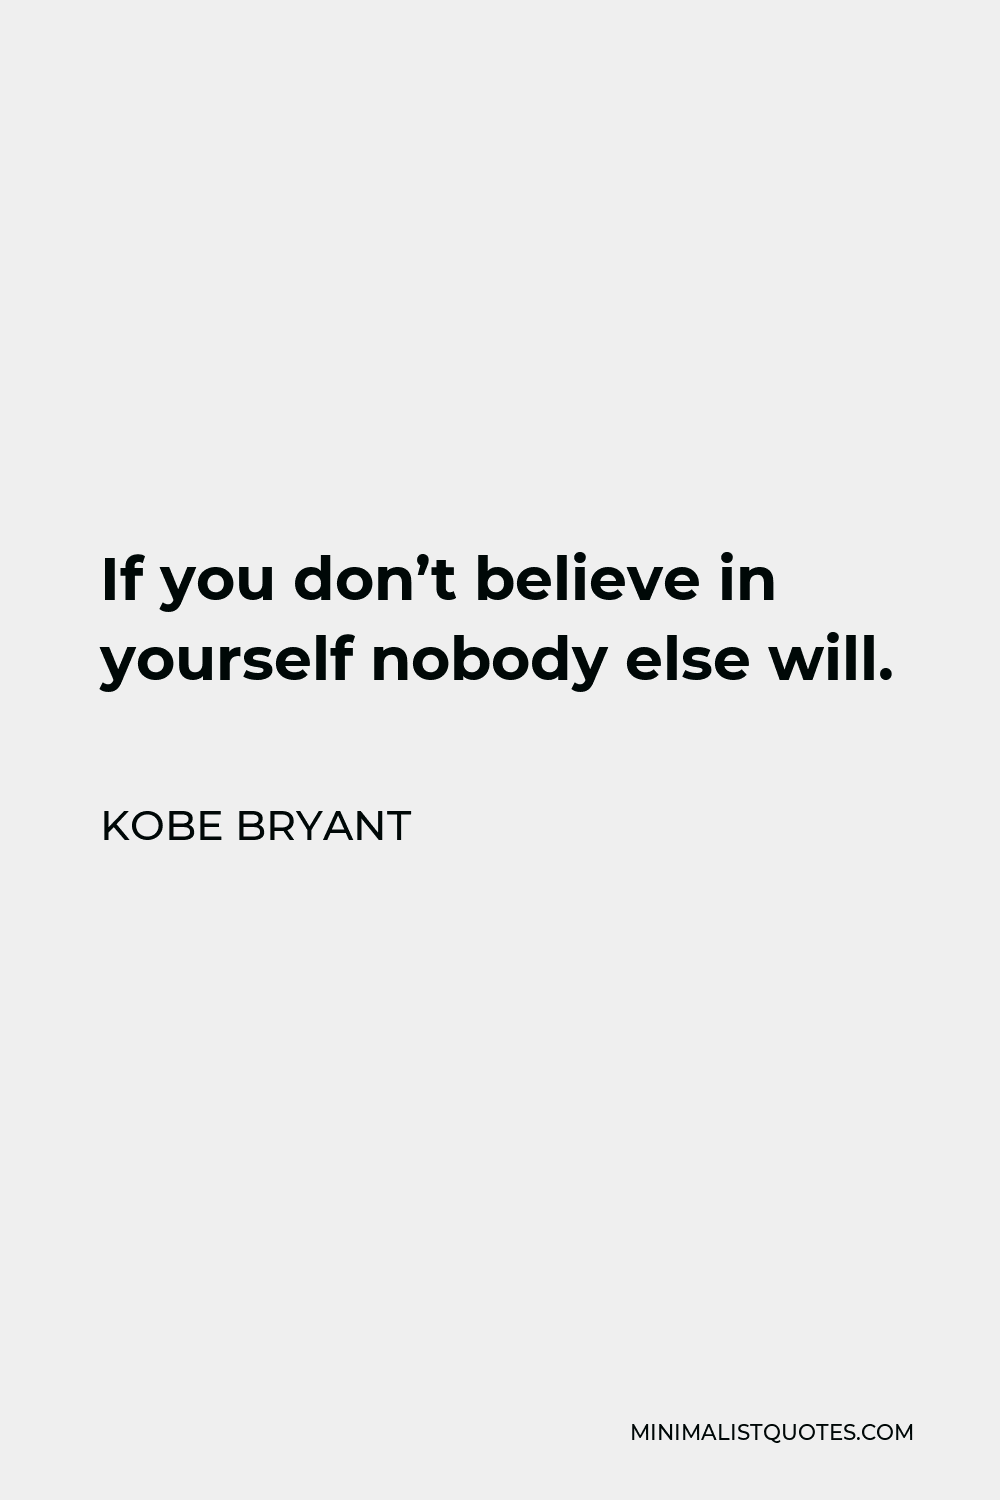 Kobe Bryant Quote: If you don't believe in yourself nobody else will.